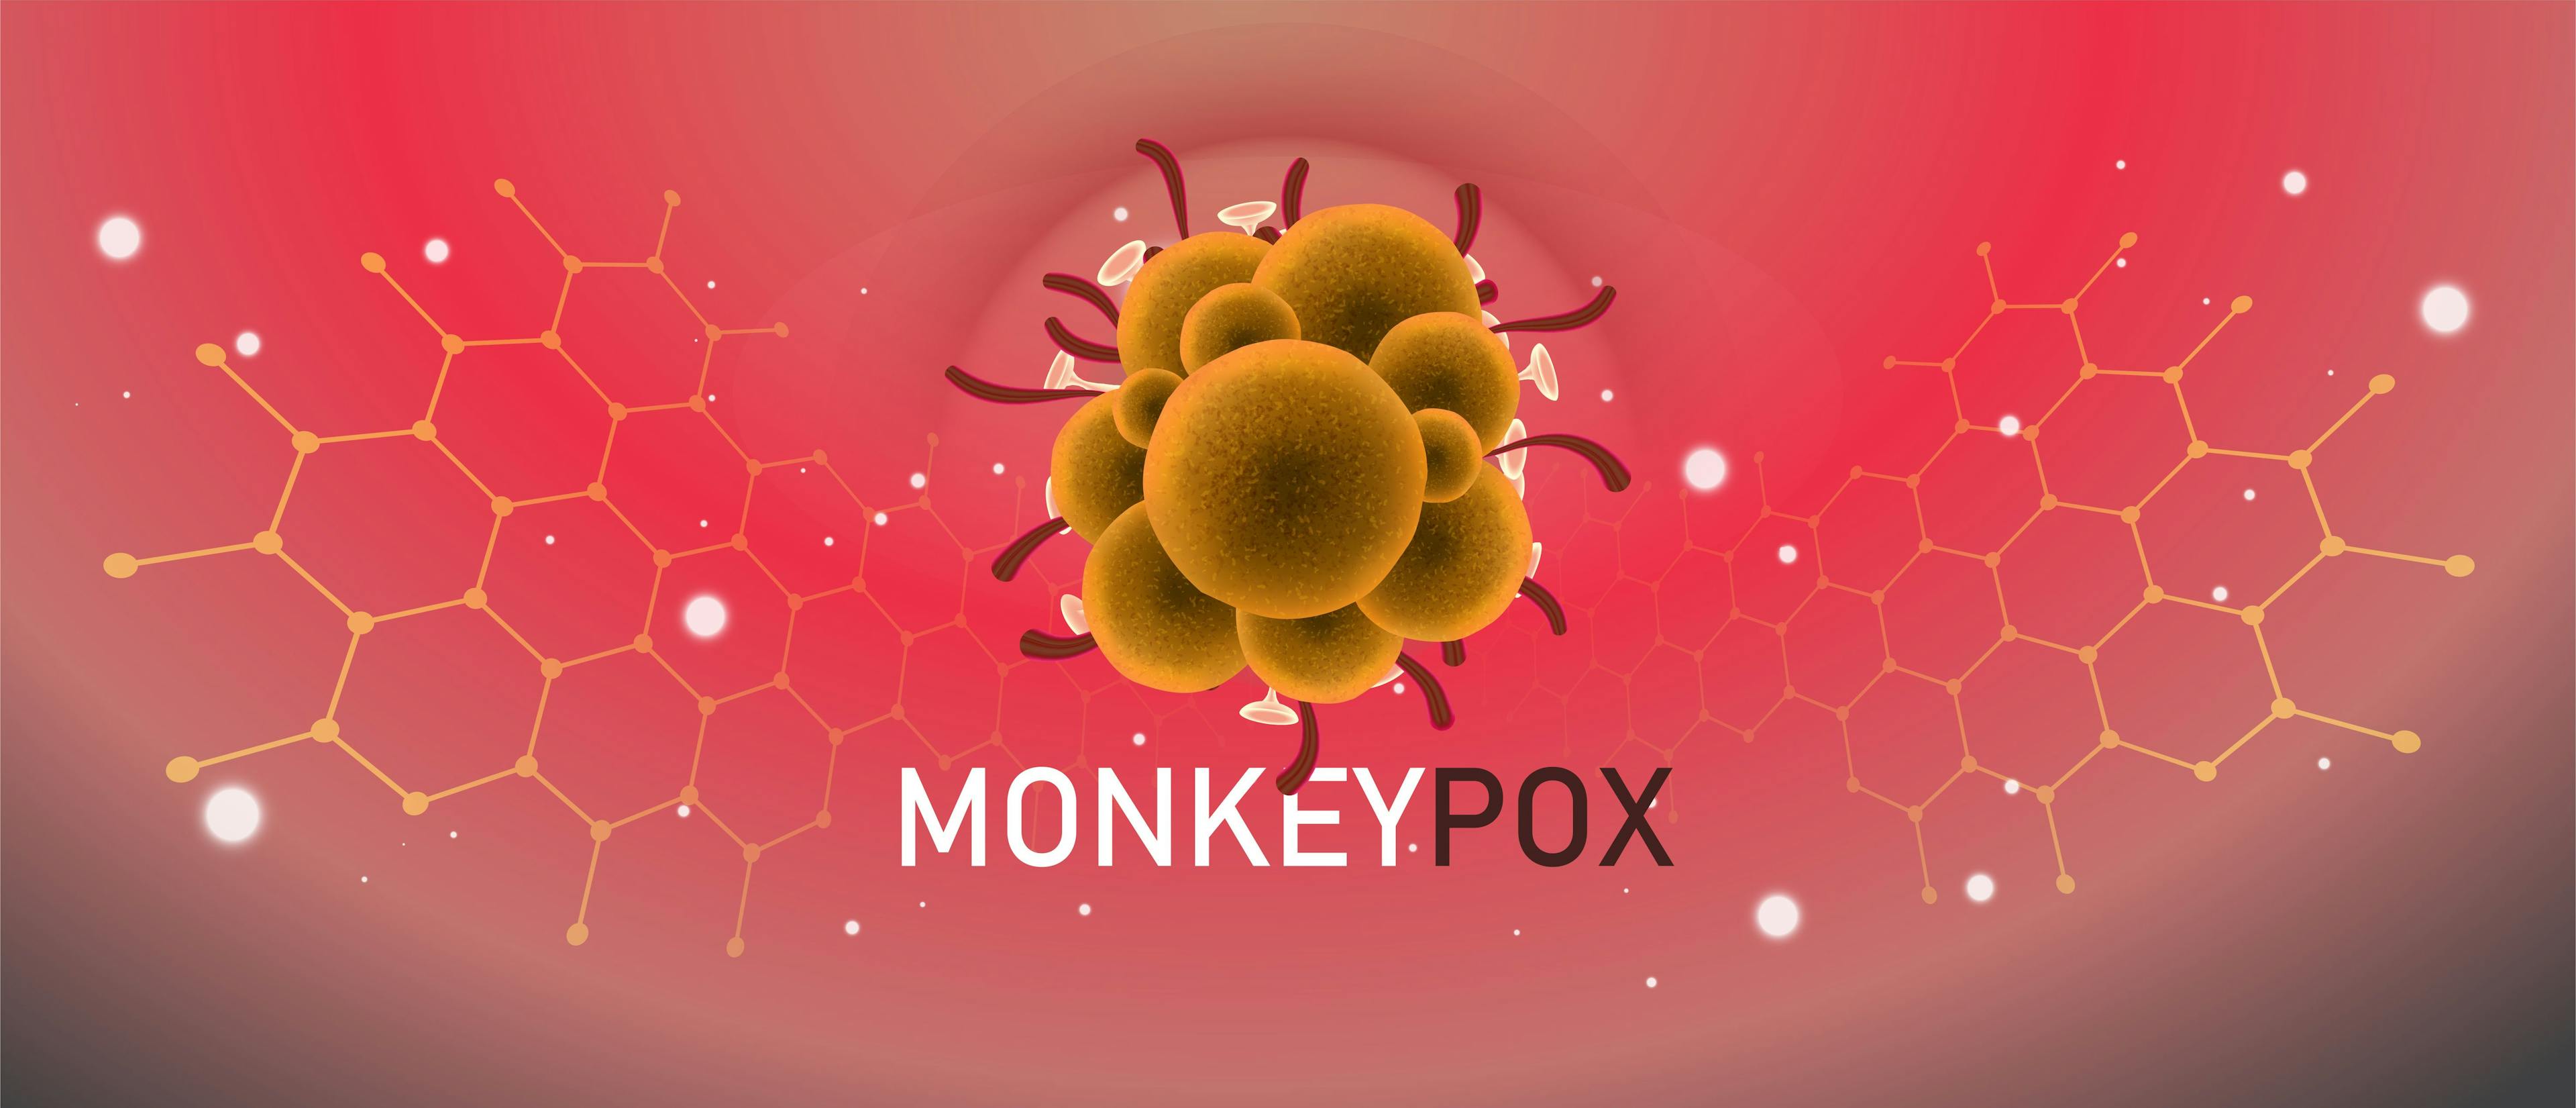 Over 100 cases of monkeypox have been identified, predominantly in Europe. Though the virus is not highly infectious, experts are concerned it may be spreading a new way.